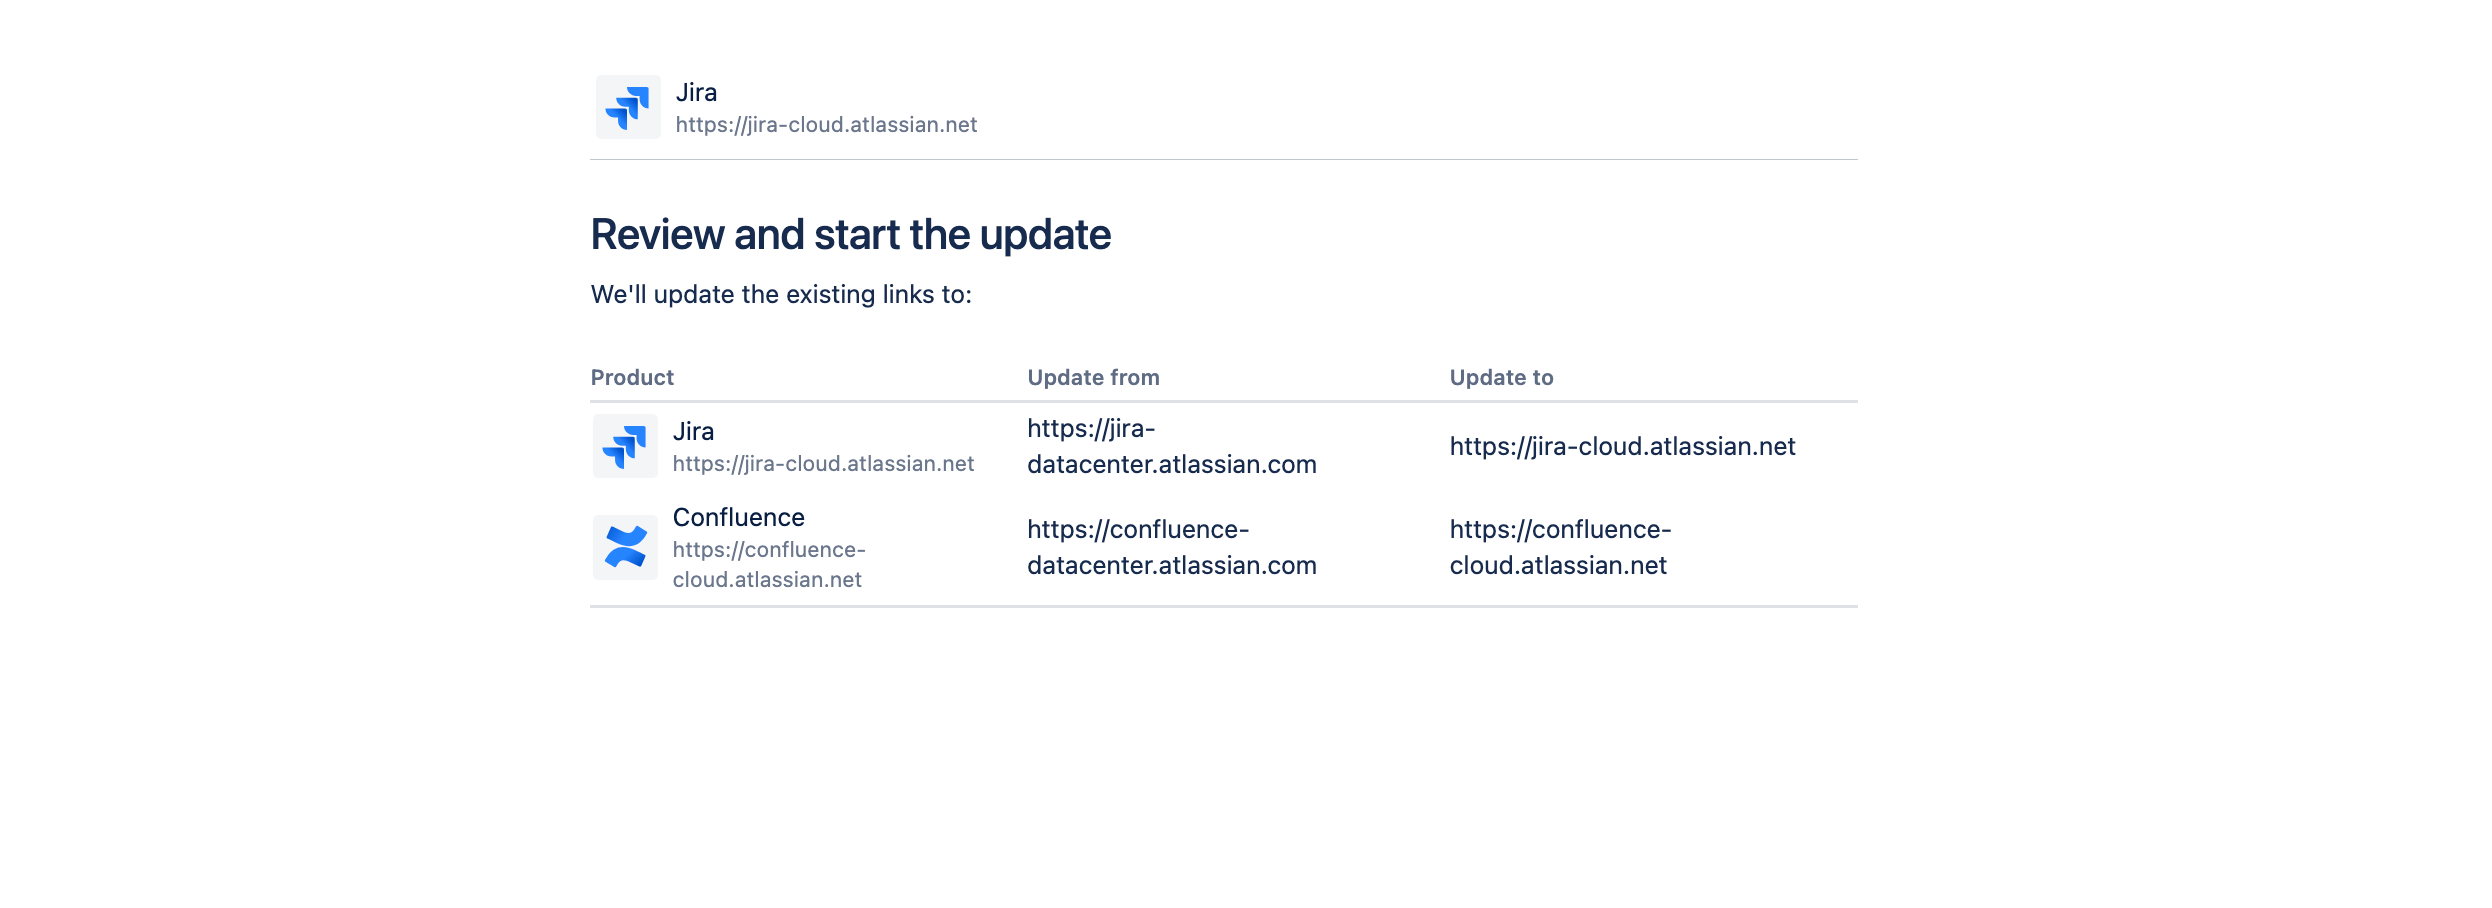 A summary that shows we'll update local links within Jira and outgoing links to Confluence.